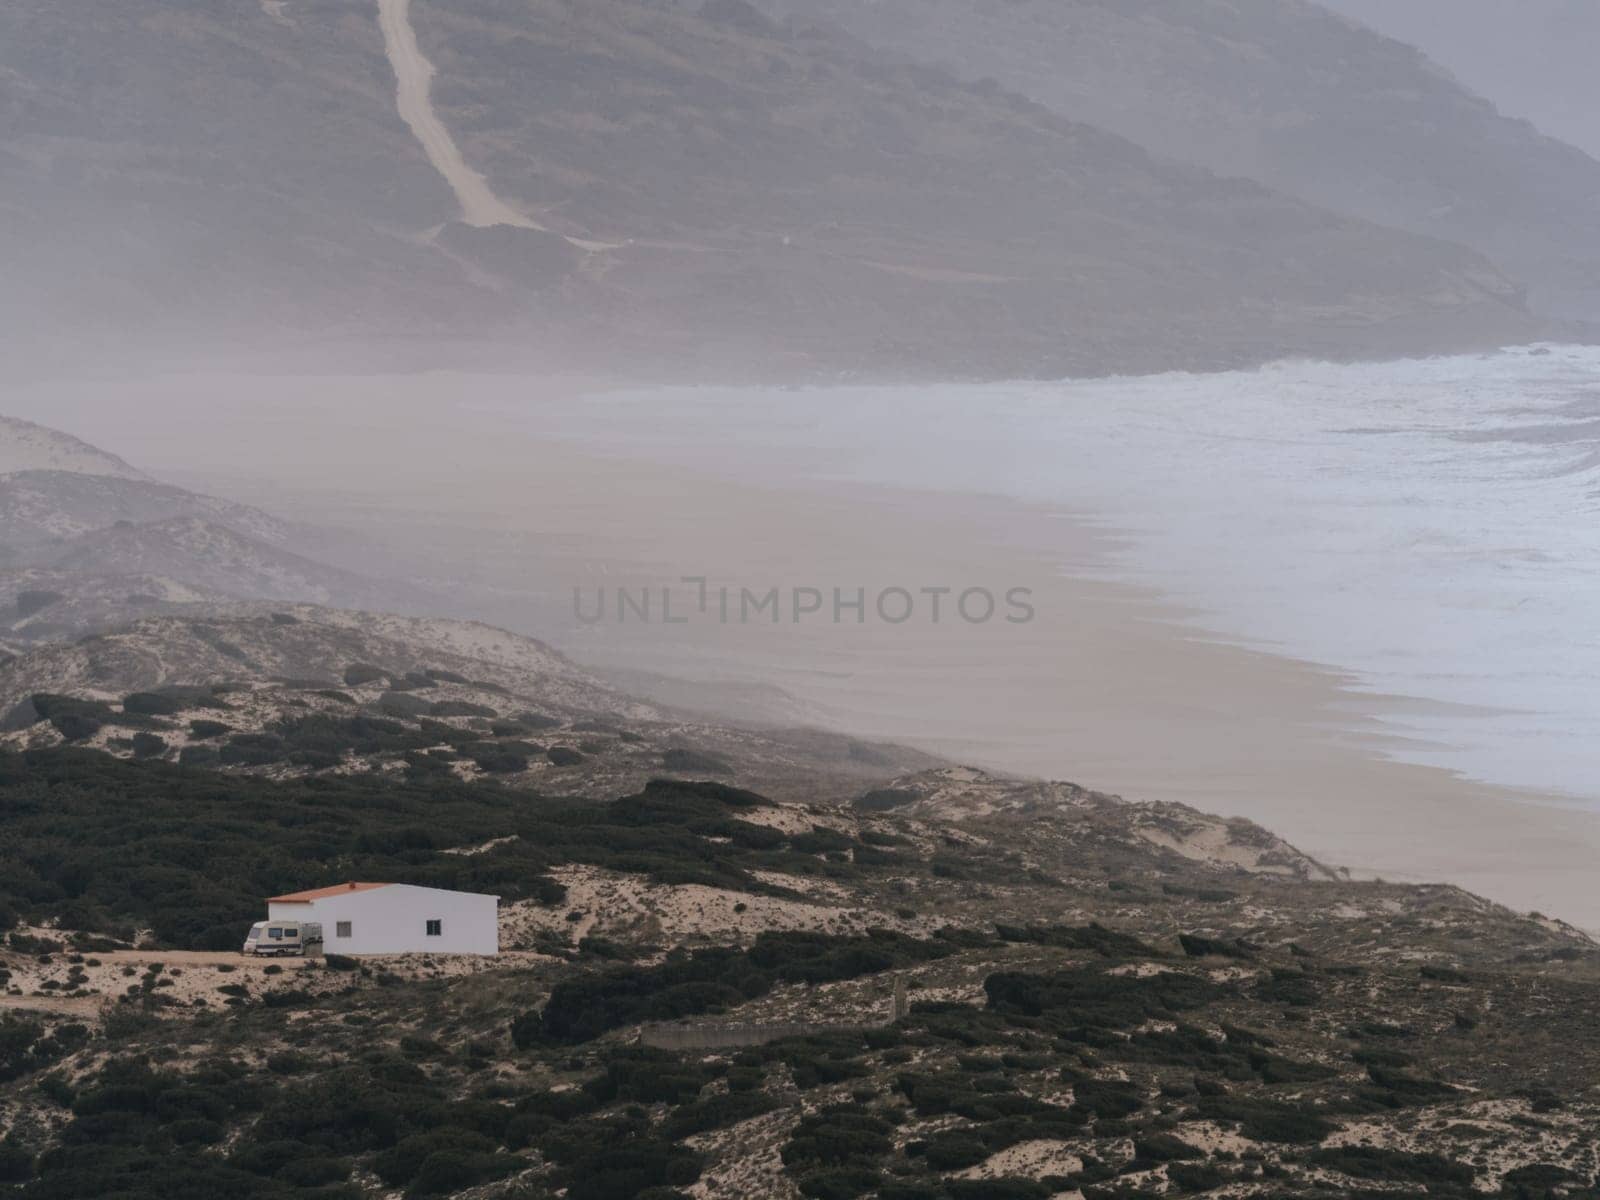 A serene and tranquil scene featuring a solitary house standing on the shores of the Atlantic Ocean in Portugal. The subdued colors and misty atmosphere created by the crashing waves provide a feeling of calmness. Adjacent to the house is a van